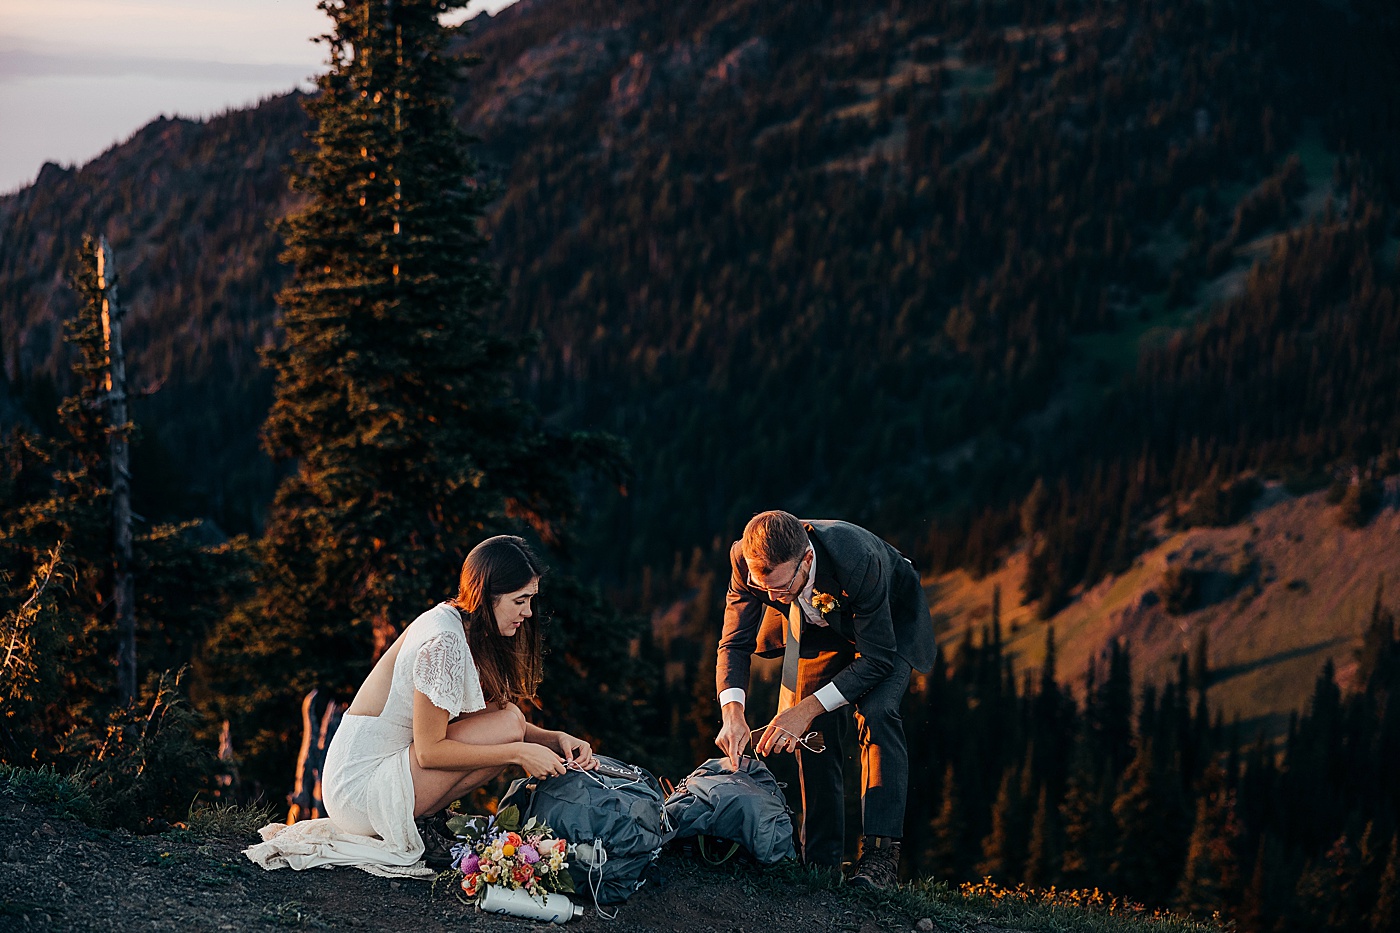 Newlyweds putting just married signs on hiking backpacks | Megan Montalvo Photography